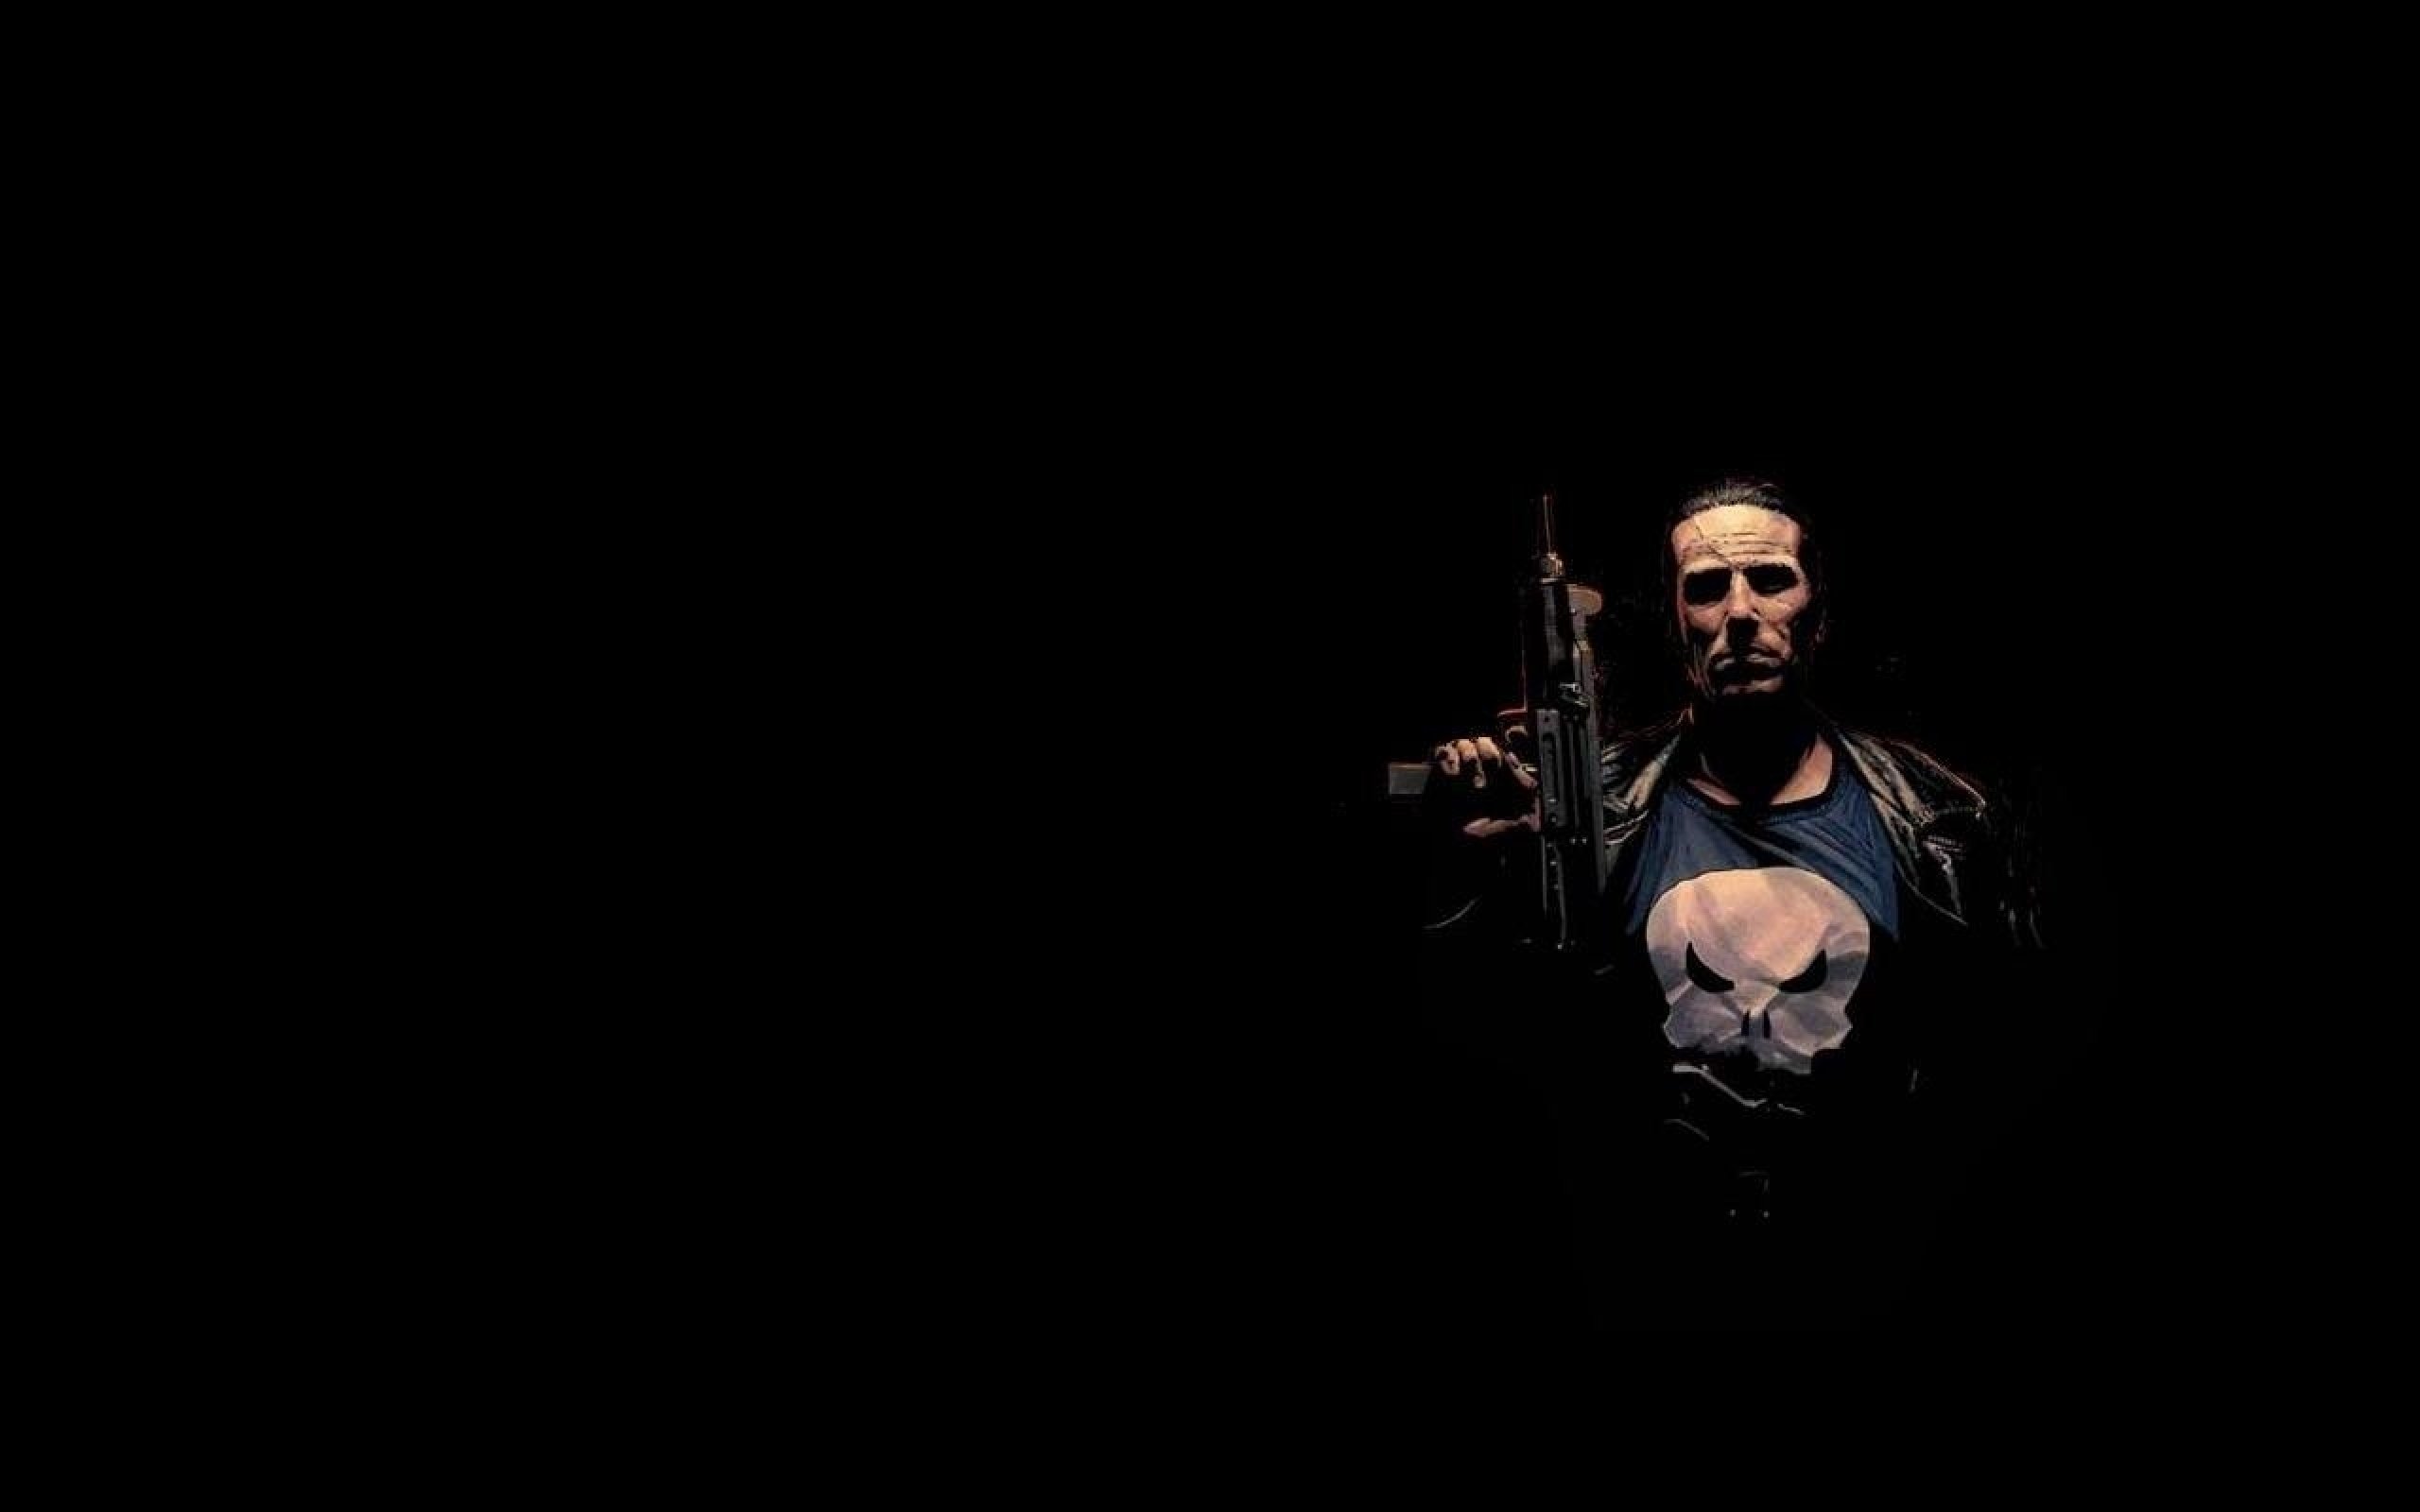 punisher skull wallpaper iphone 5 Car Pictures 2560x1600